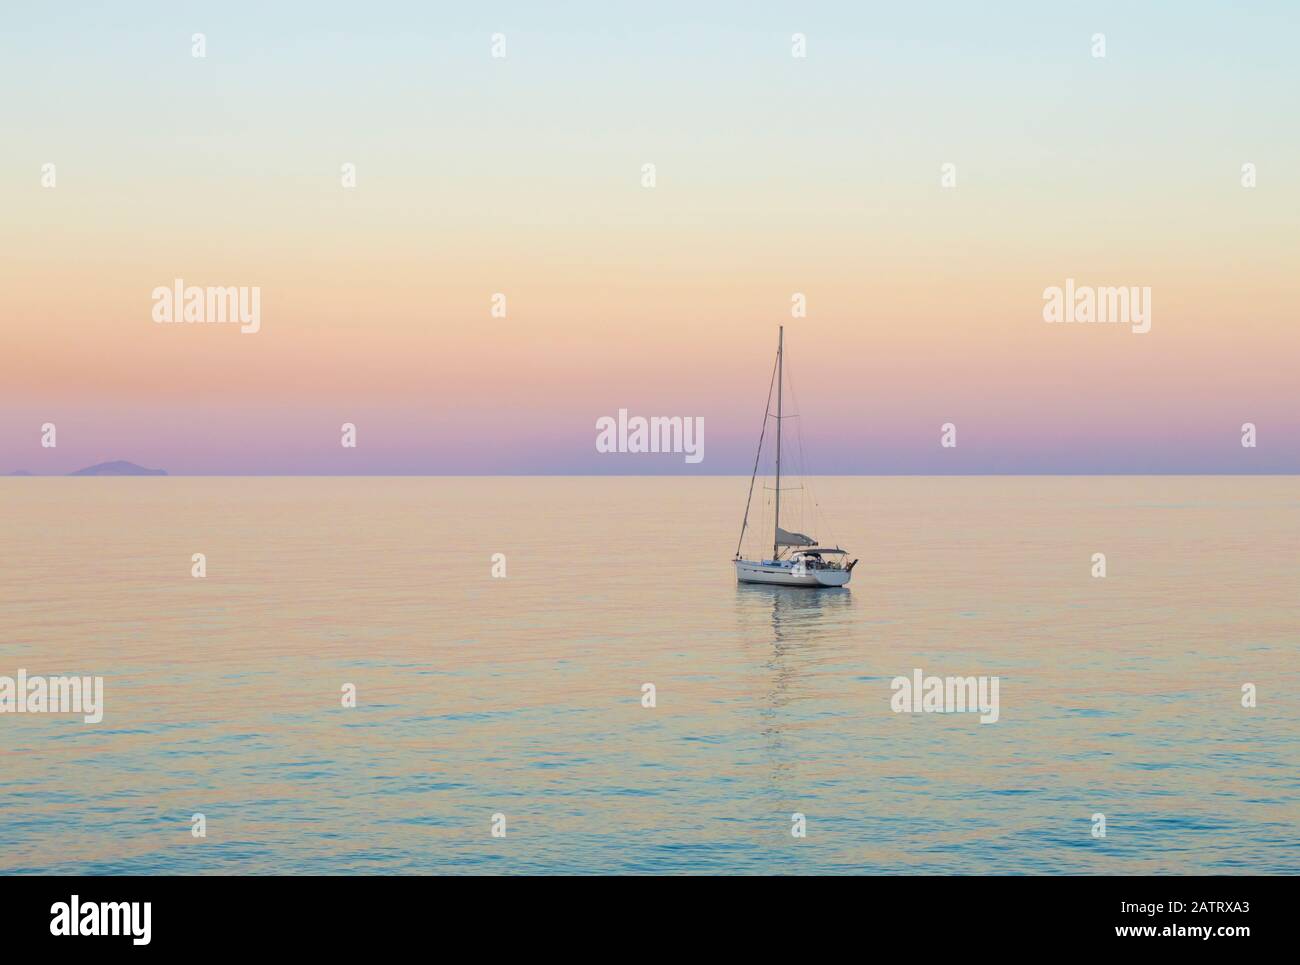 Small white sailboat in Aegean sea by Greek island of Santorini in calm summer evening after sunset. Stock Photo